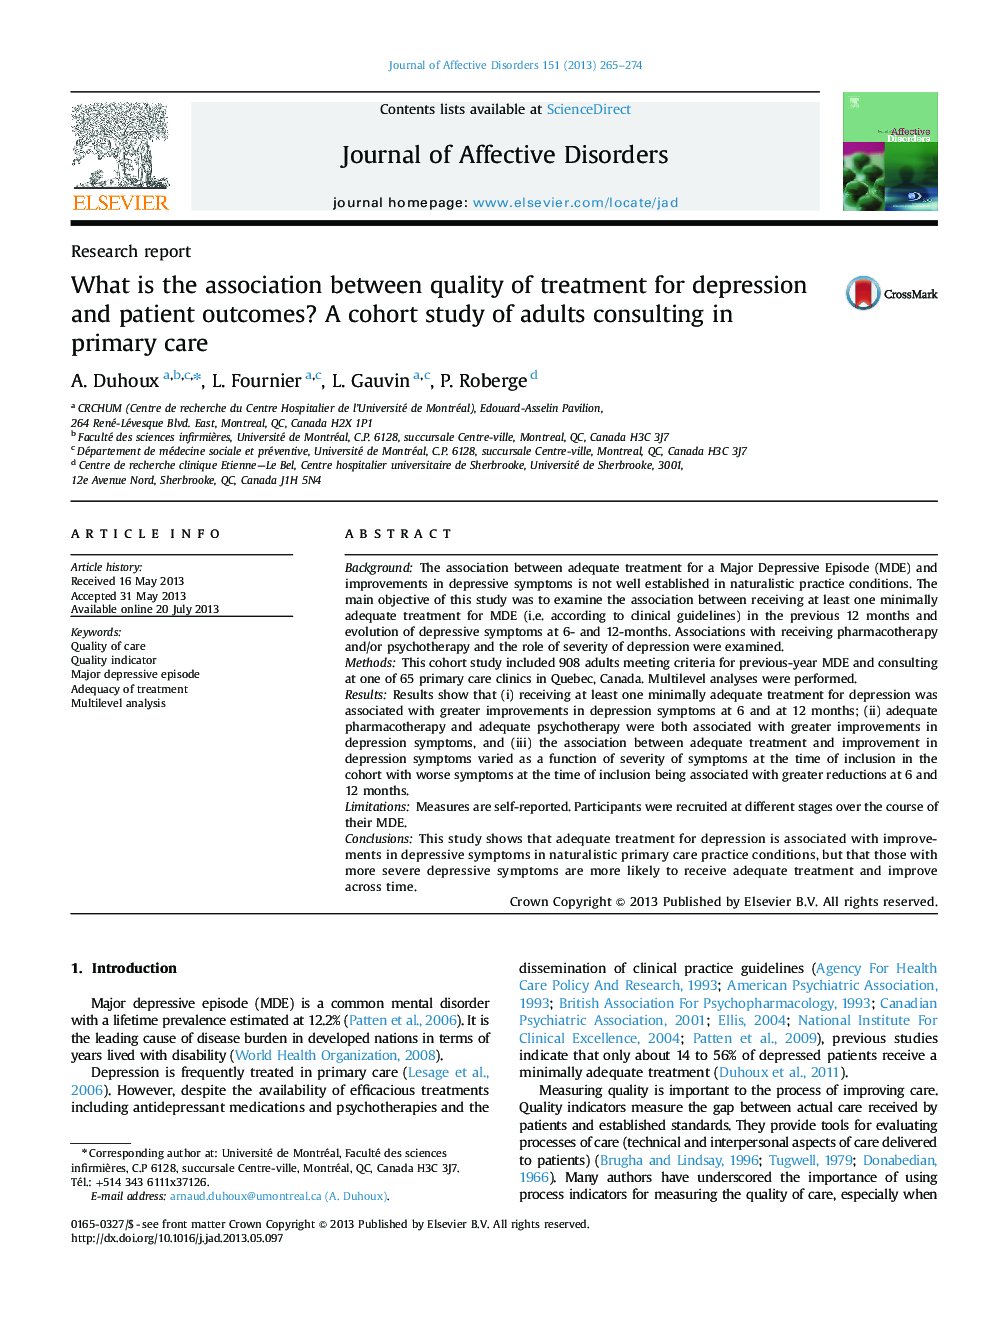 What is the association between quality of treatment for depression and patient outcomes? A cohort study of adults consulting in primary care